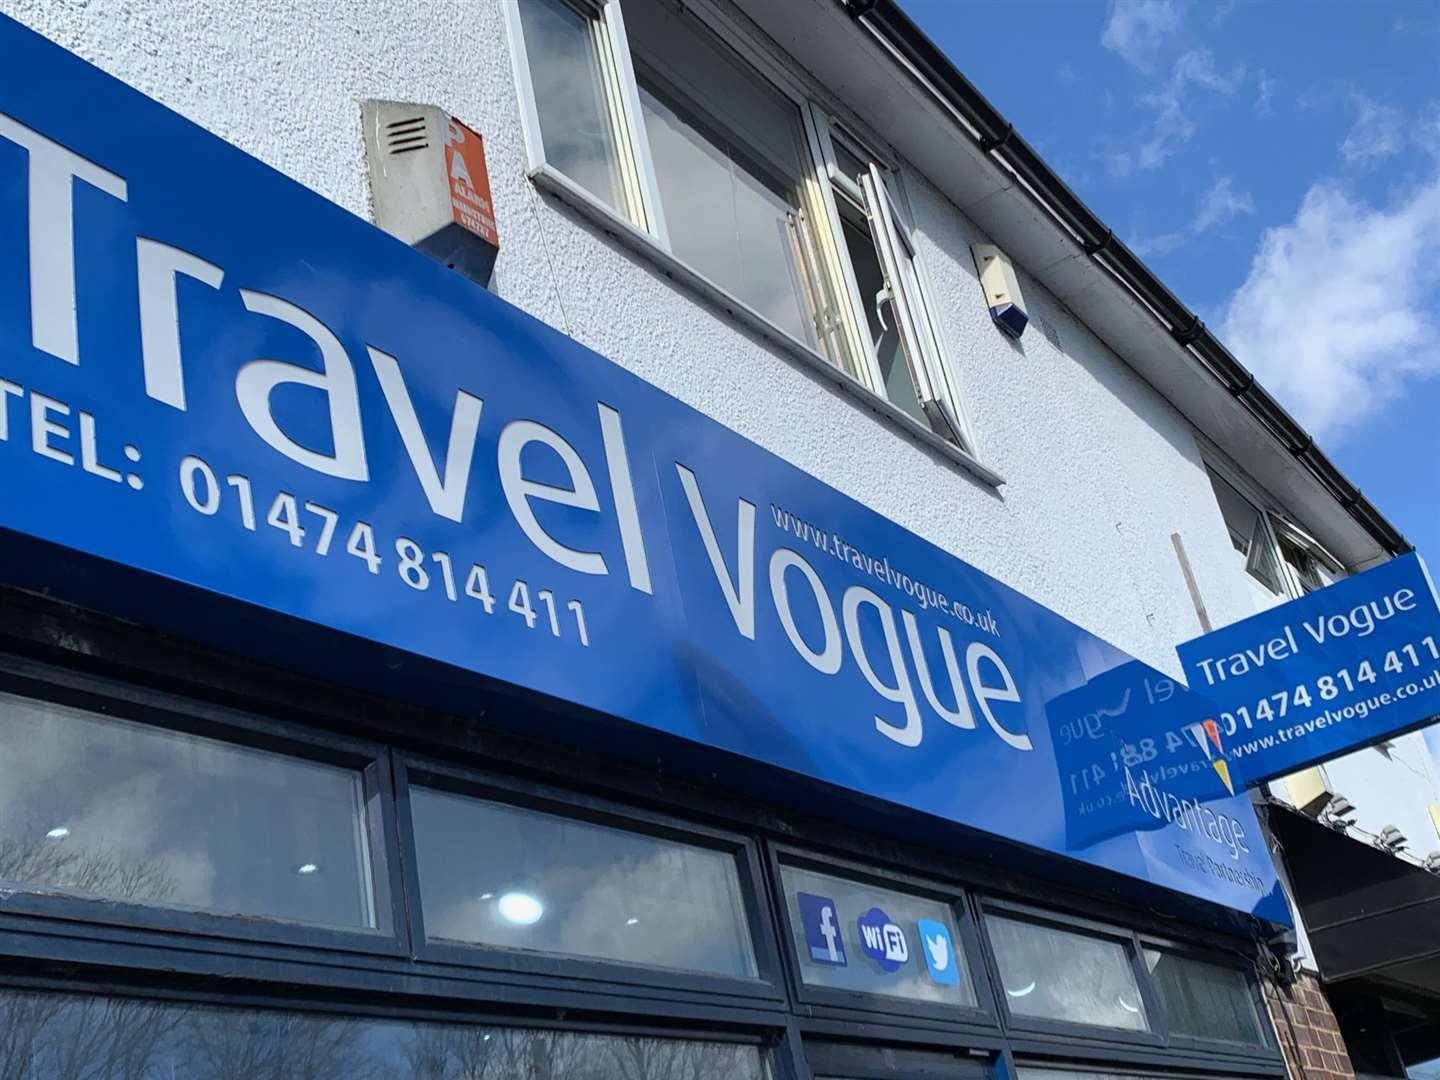 Travel Vogue Ltd, based in The Parade, Meopham